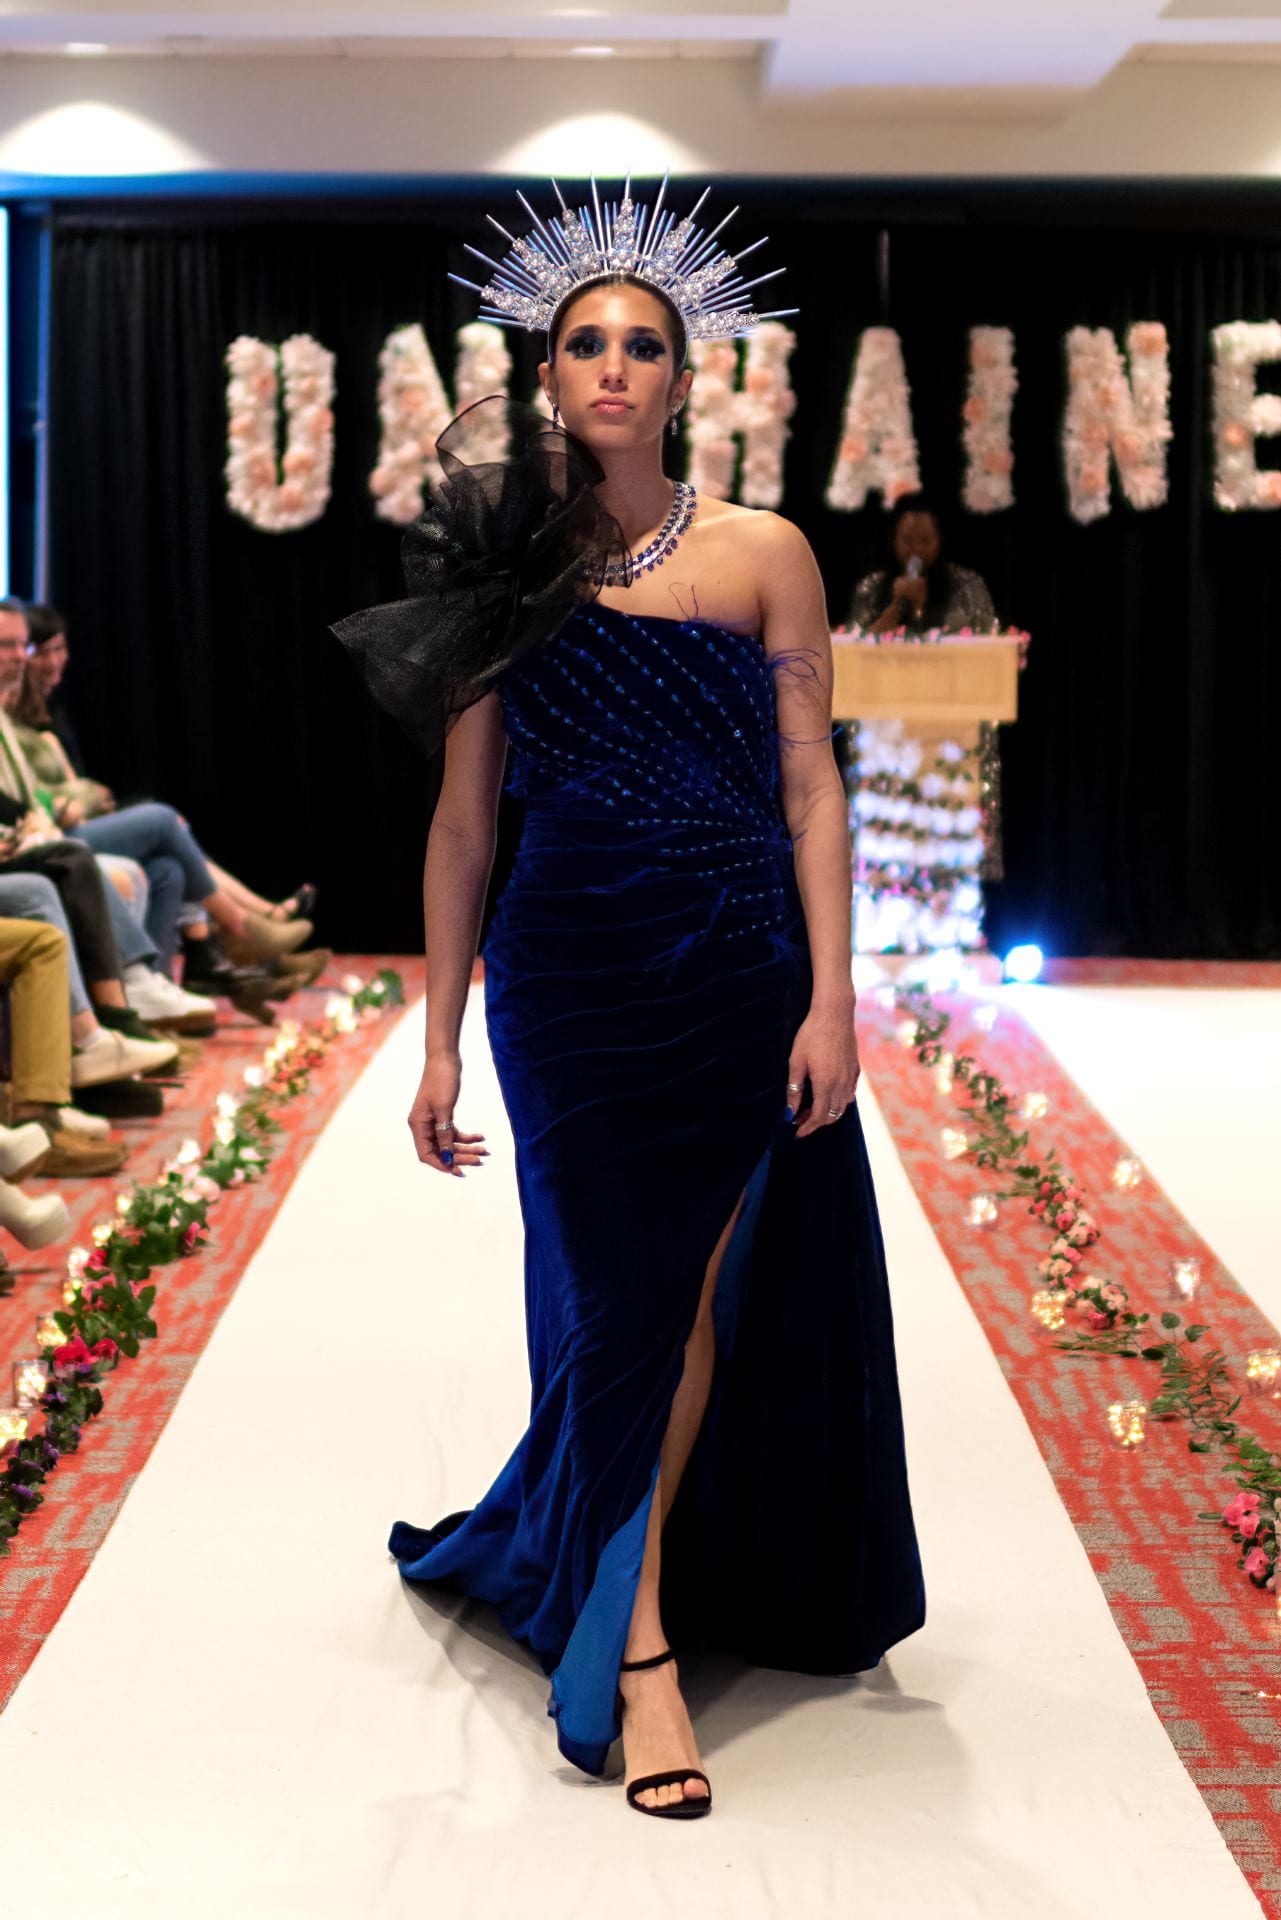 A Recap of the 2023 Unchained Fashion Show: How This Year’s Show Used ...